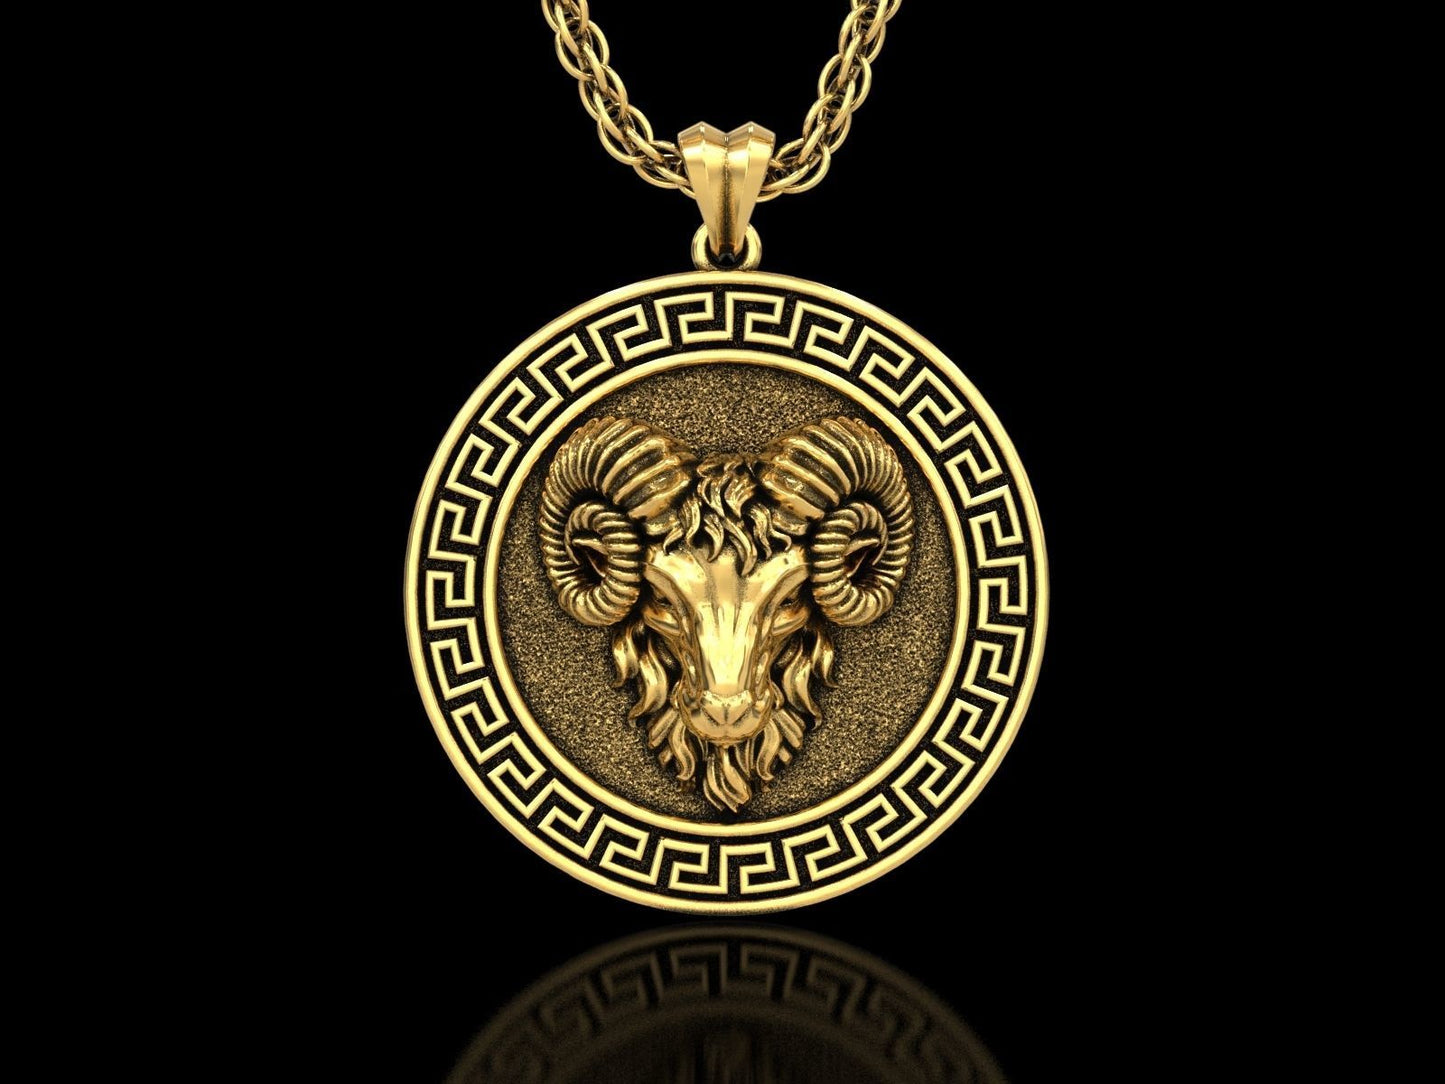 RARE PRINCE by CARAT SUTRA | Unique Designed Pendant for Aries Zodiac for Men | 925 Sterling Silver Oxidized Pendant | Men's Jewelry | With Certificate of Authenticity and 925 Hallmark